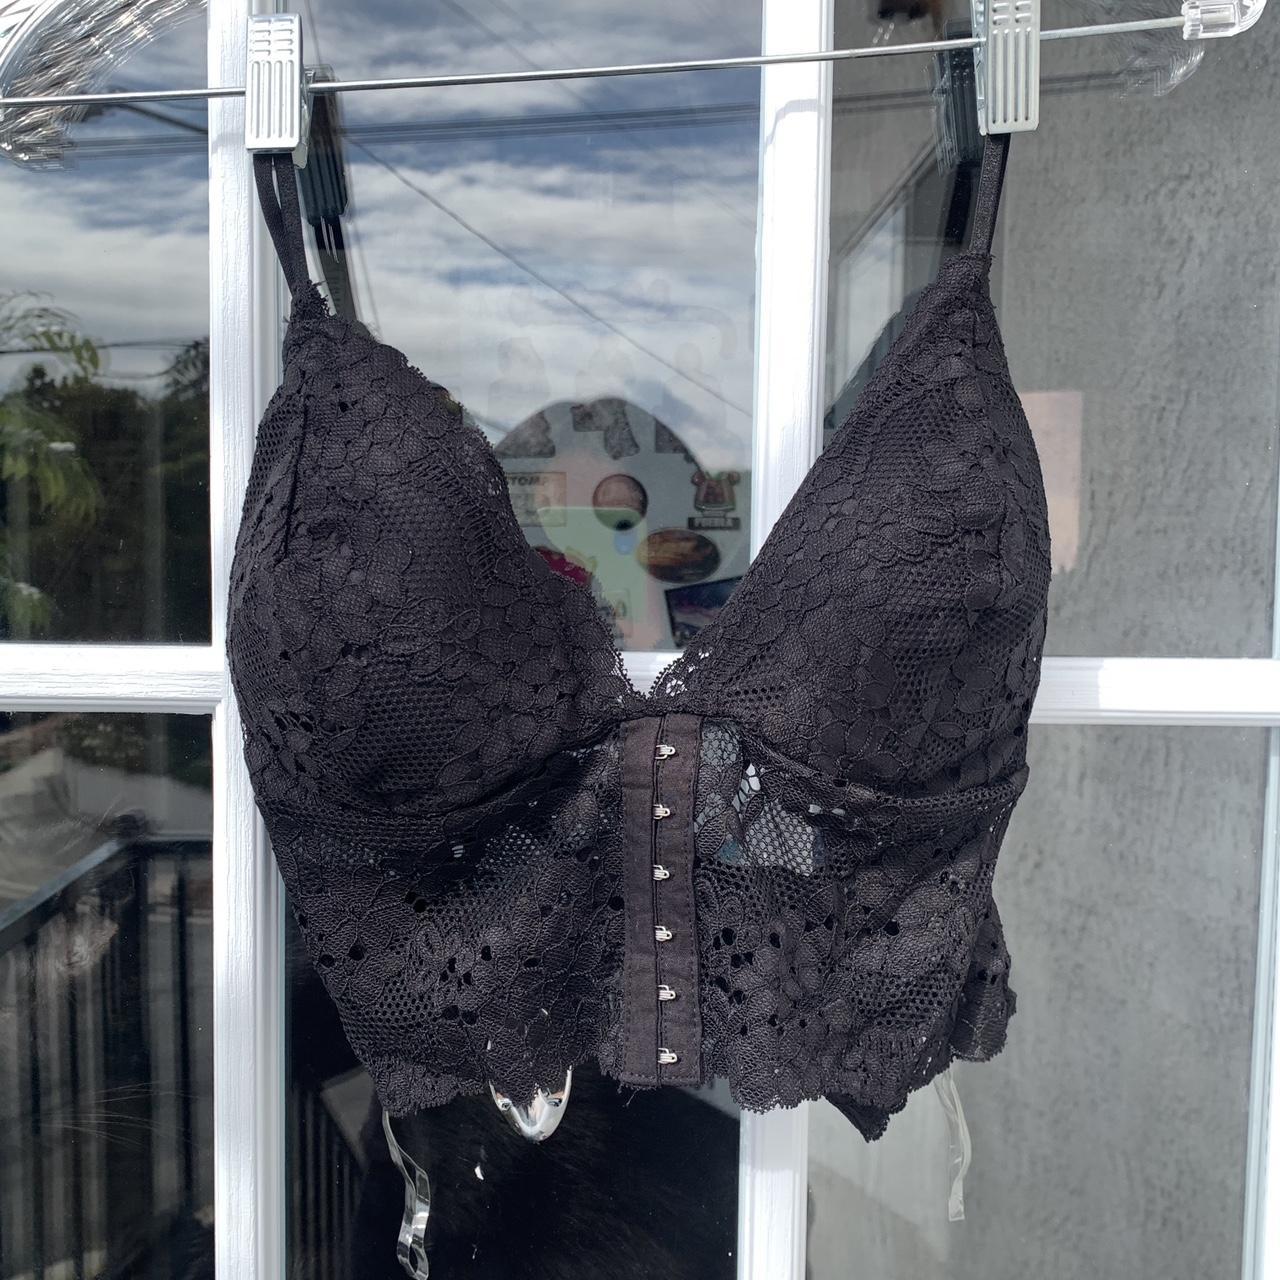 Next 2pack full cup bras size 34b these are new with - Depop